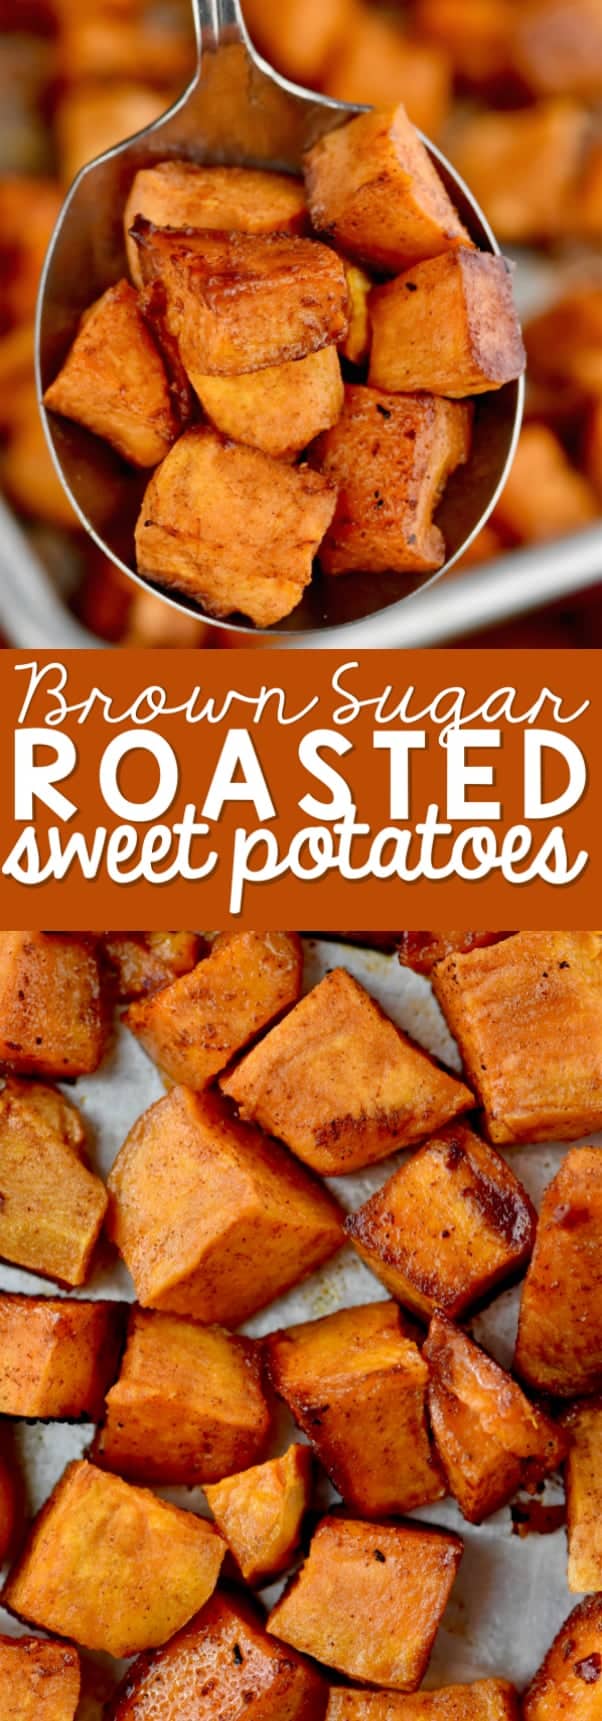 These Brown Sugar Roasted Sweet Potatoes are roasted with brown sugar, cinnamon, butter, and a little cayenne for a kick.  They are the perfect side dish recipe.  Easy to throw together and delicious! 